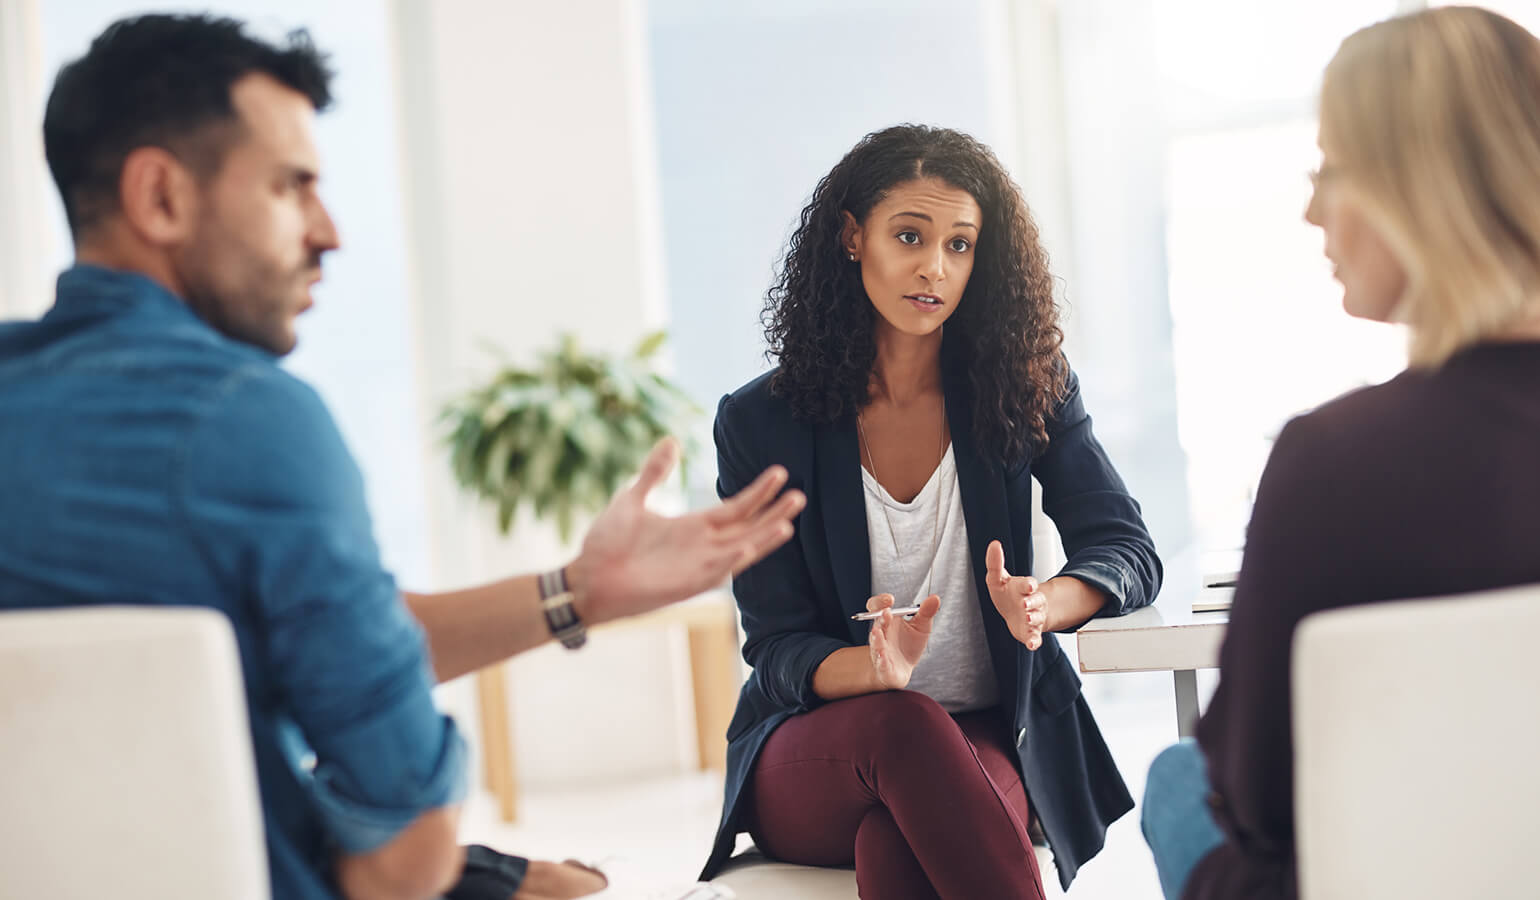 An image of a mediation session. There are three people sitting in a circle. Two of the people seem to be speaking emotionally to each other. The third person is listening to them and looks to be responding.